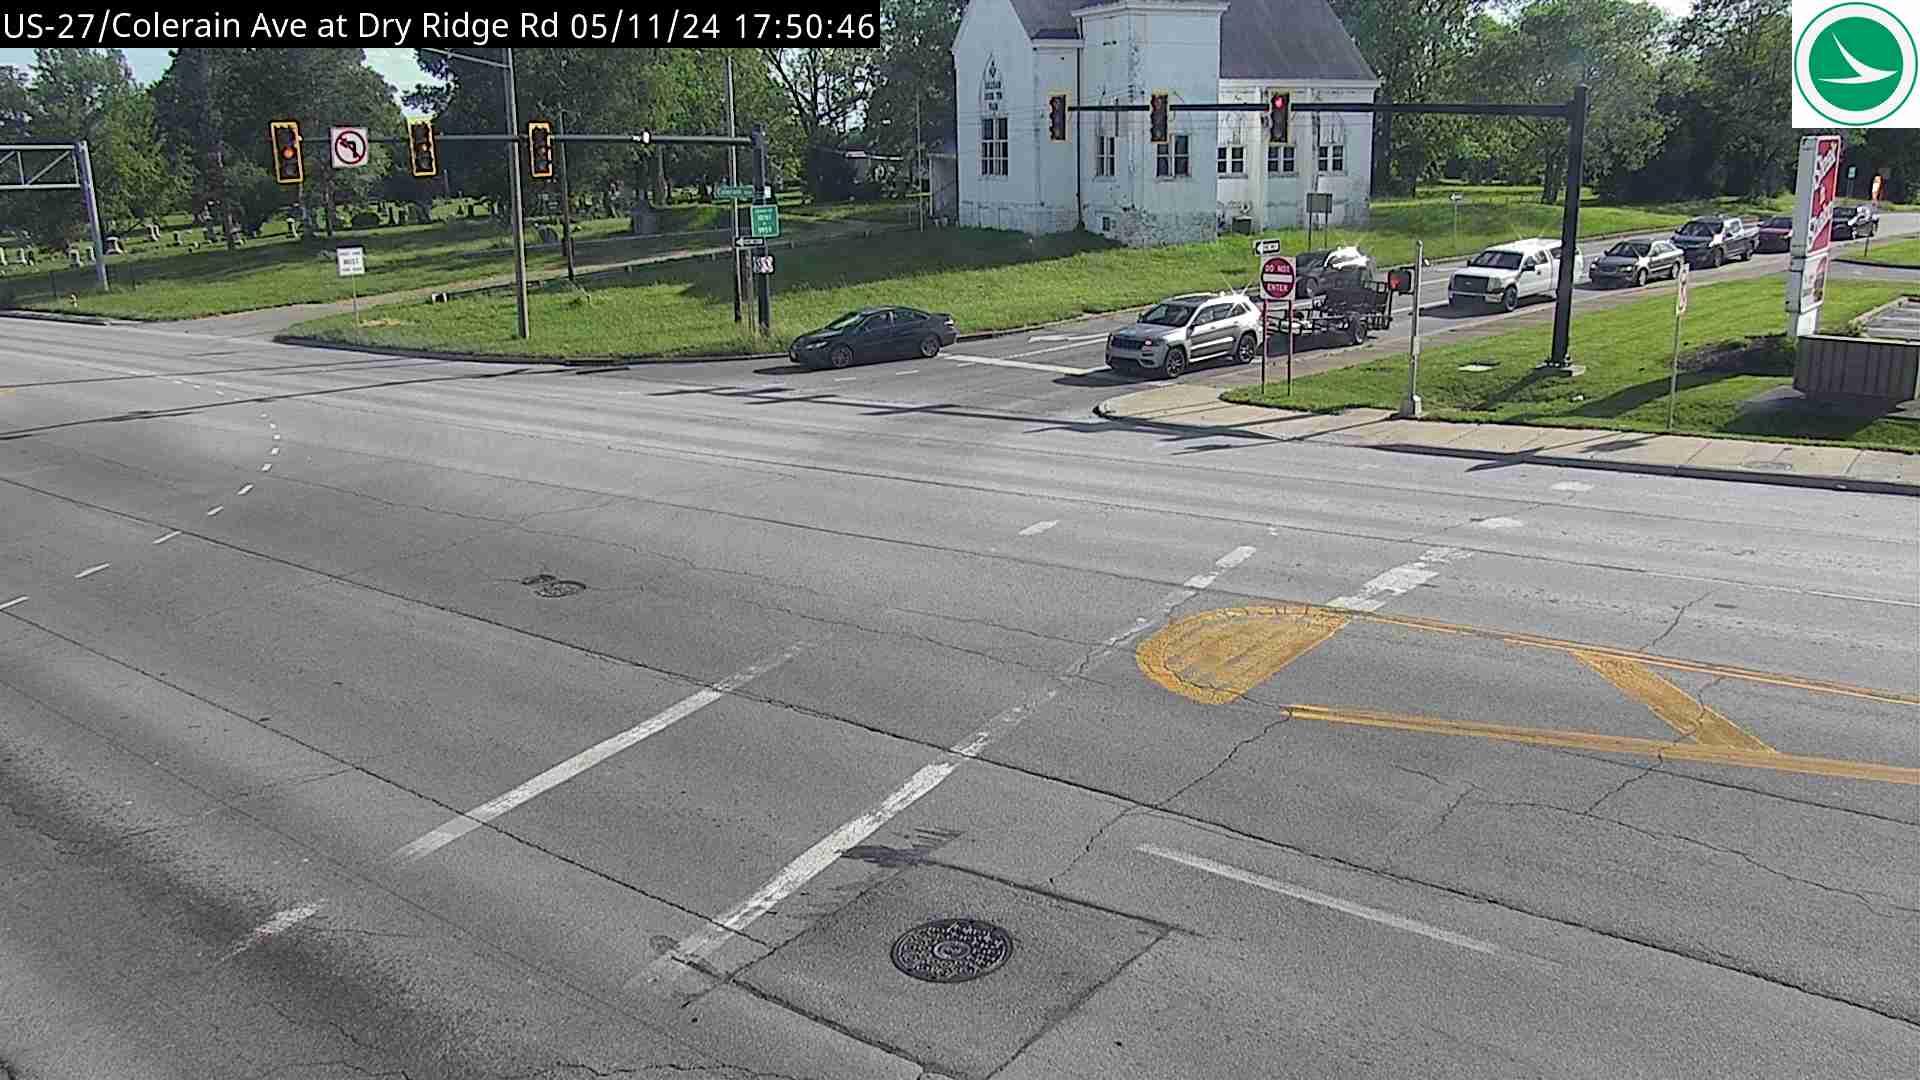 Traffic Cam Bevis: US-27/Colerain Ave at Dry Ridge Rd Player